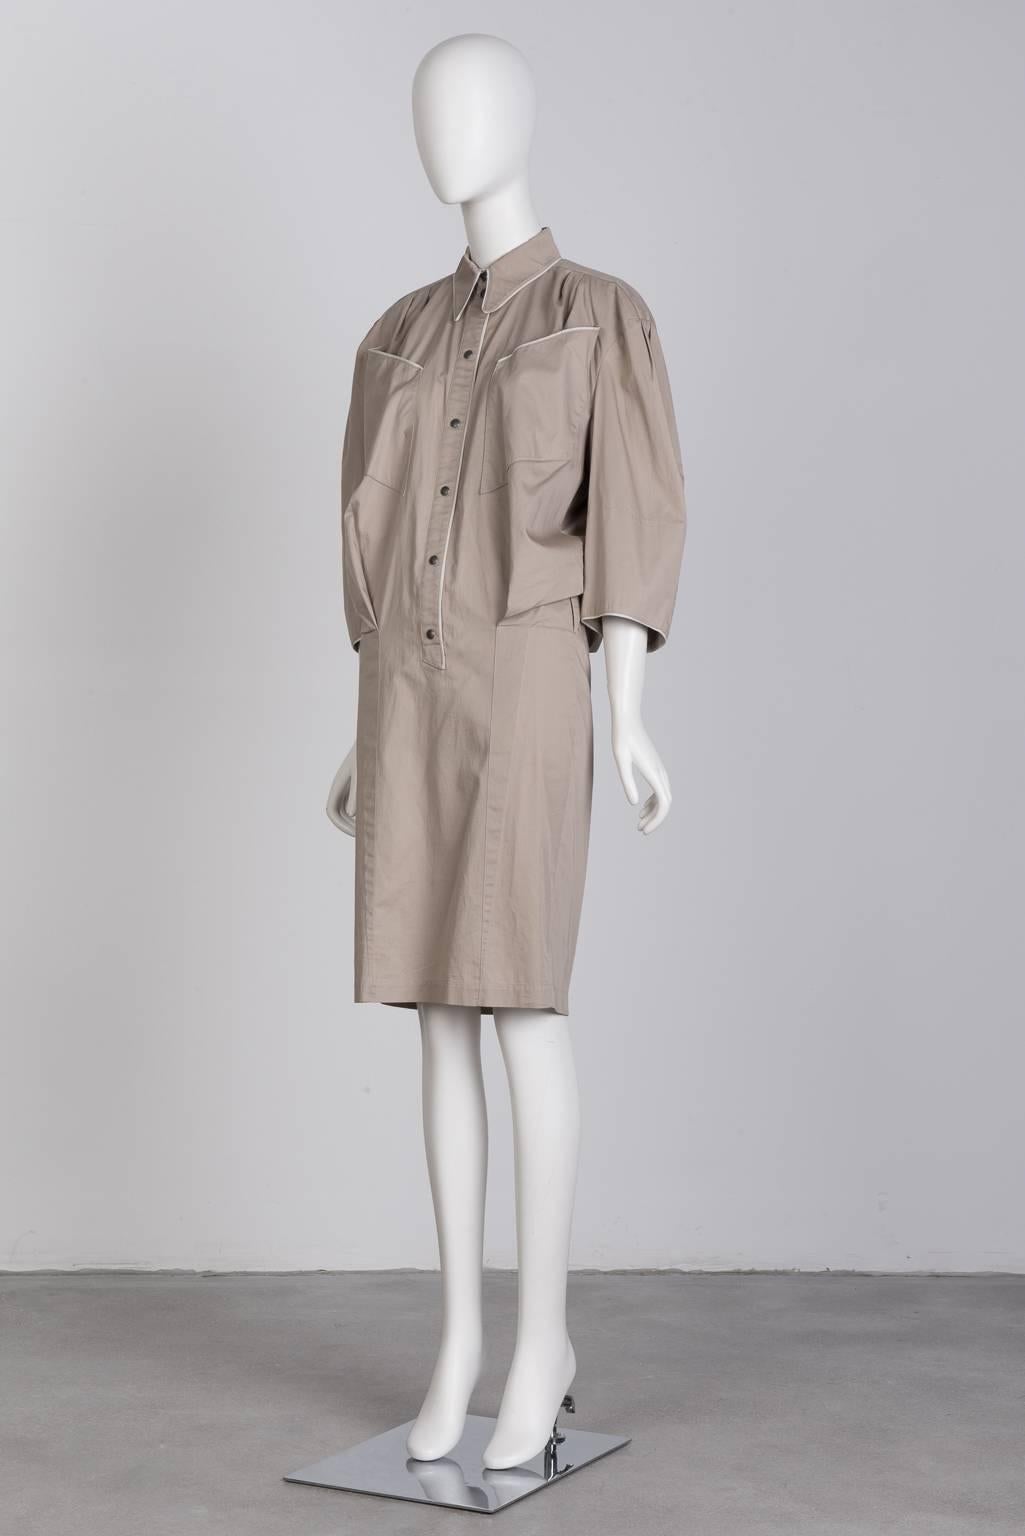 Khaki, cuffless, knee length dress with white piping and snap closures.